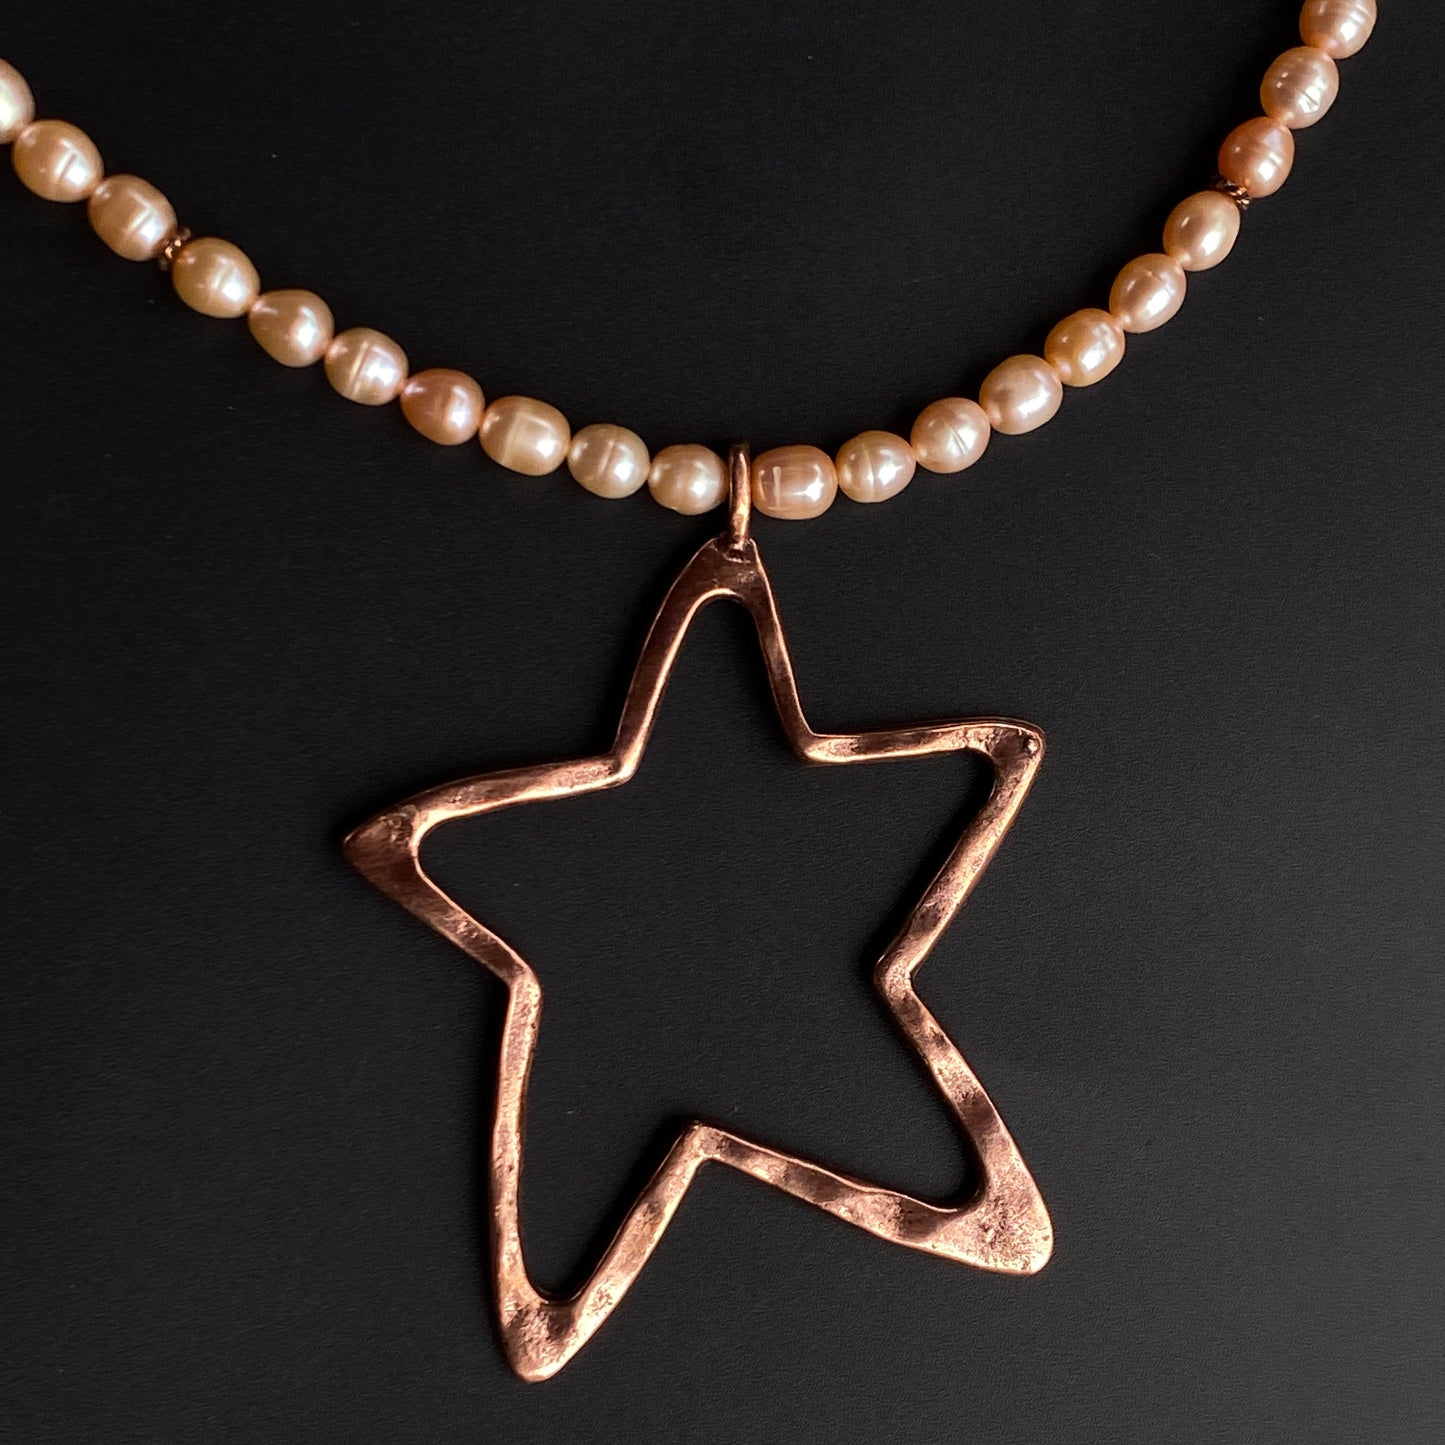 Pearl and Star Necklace